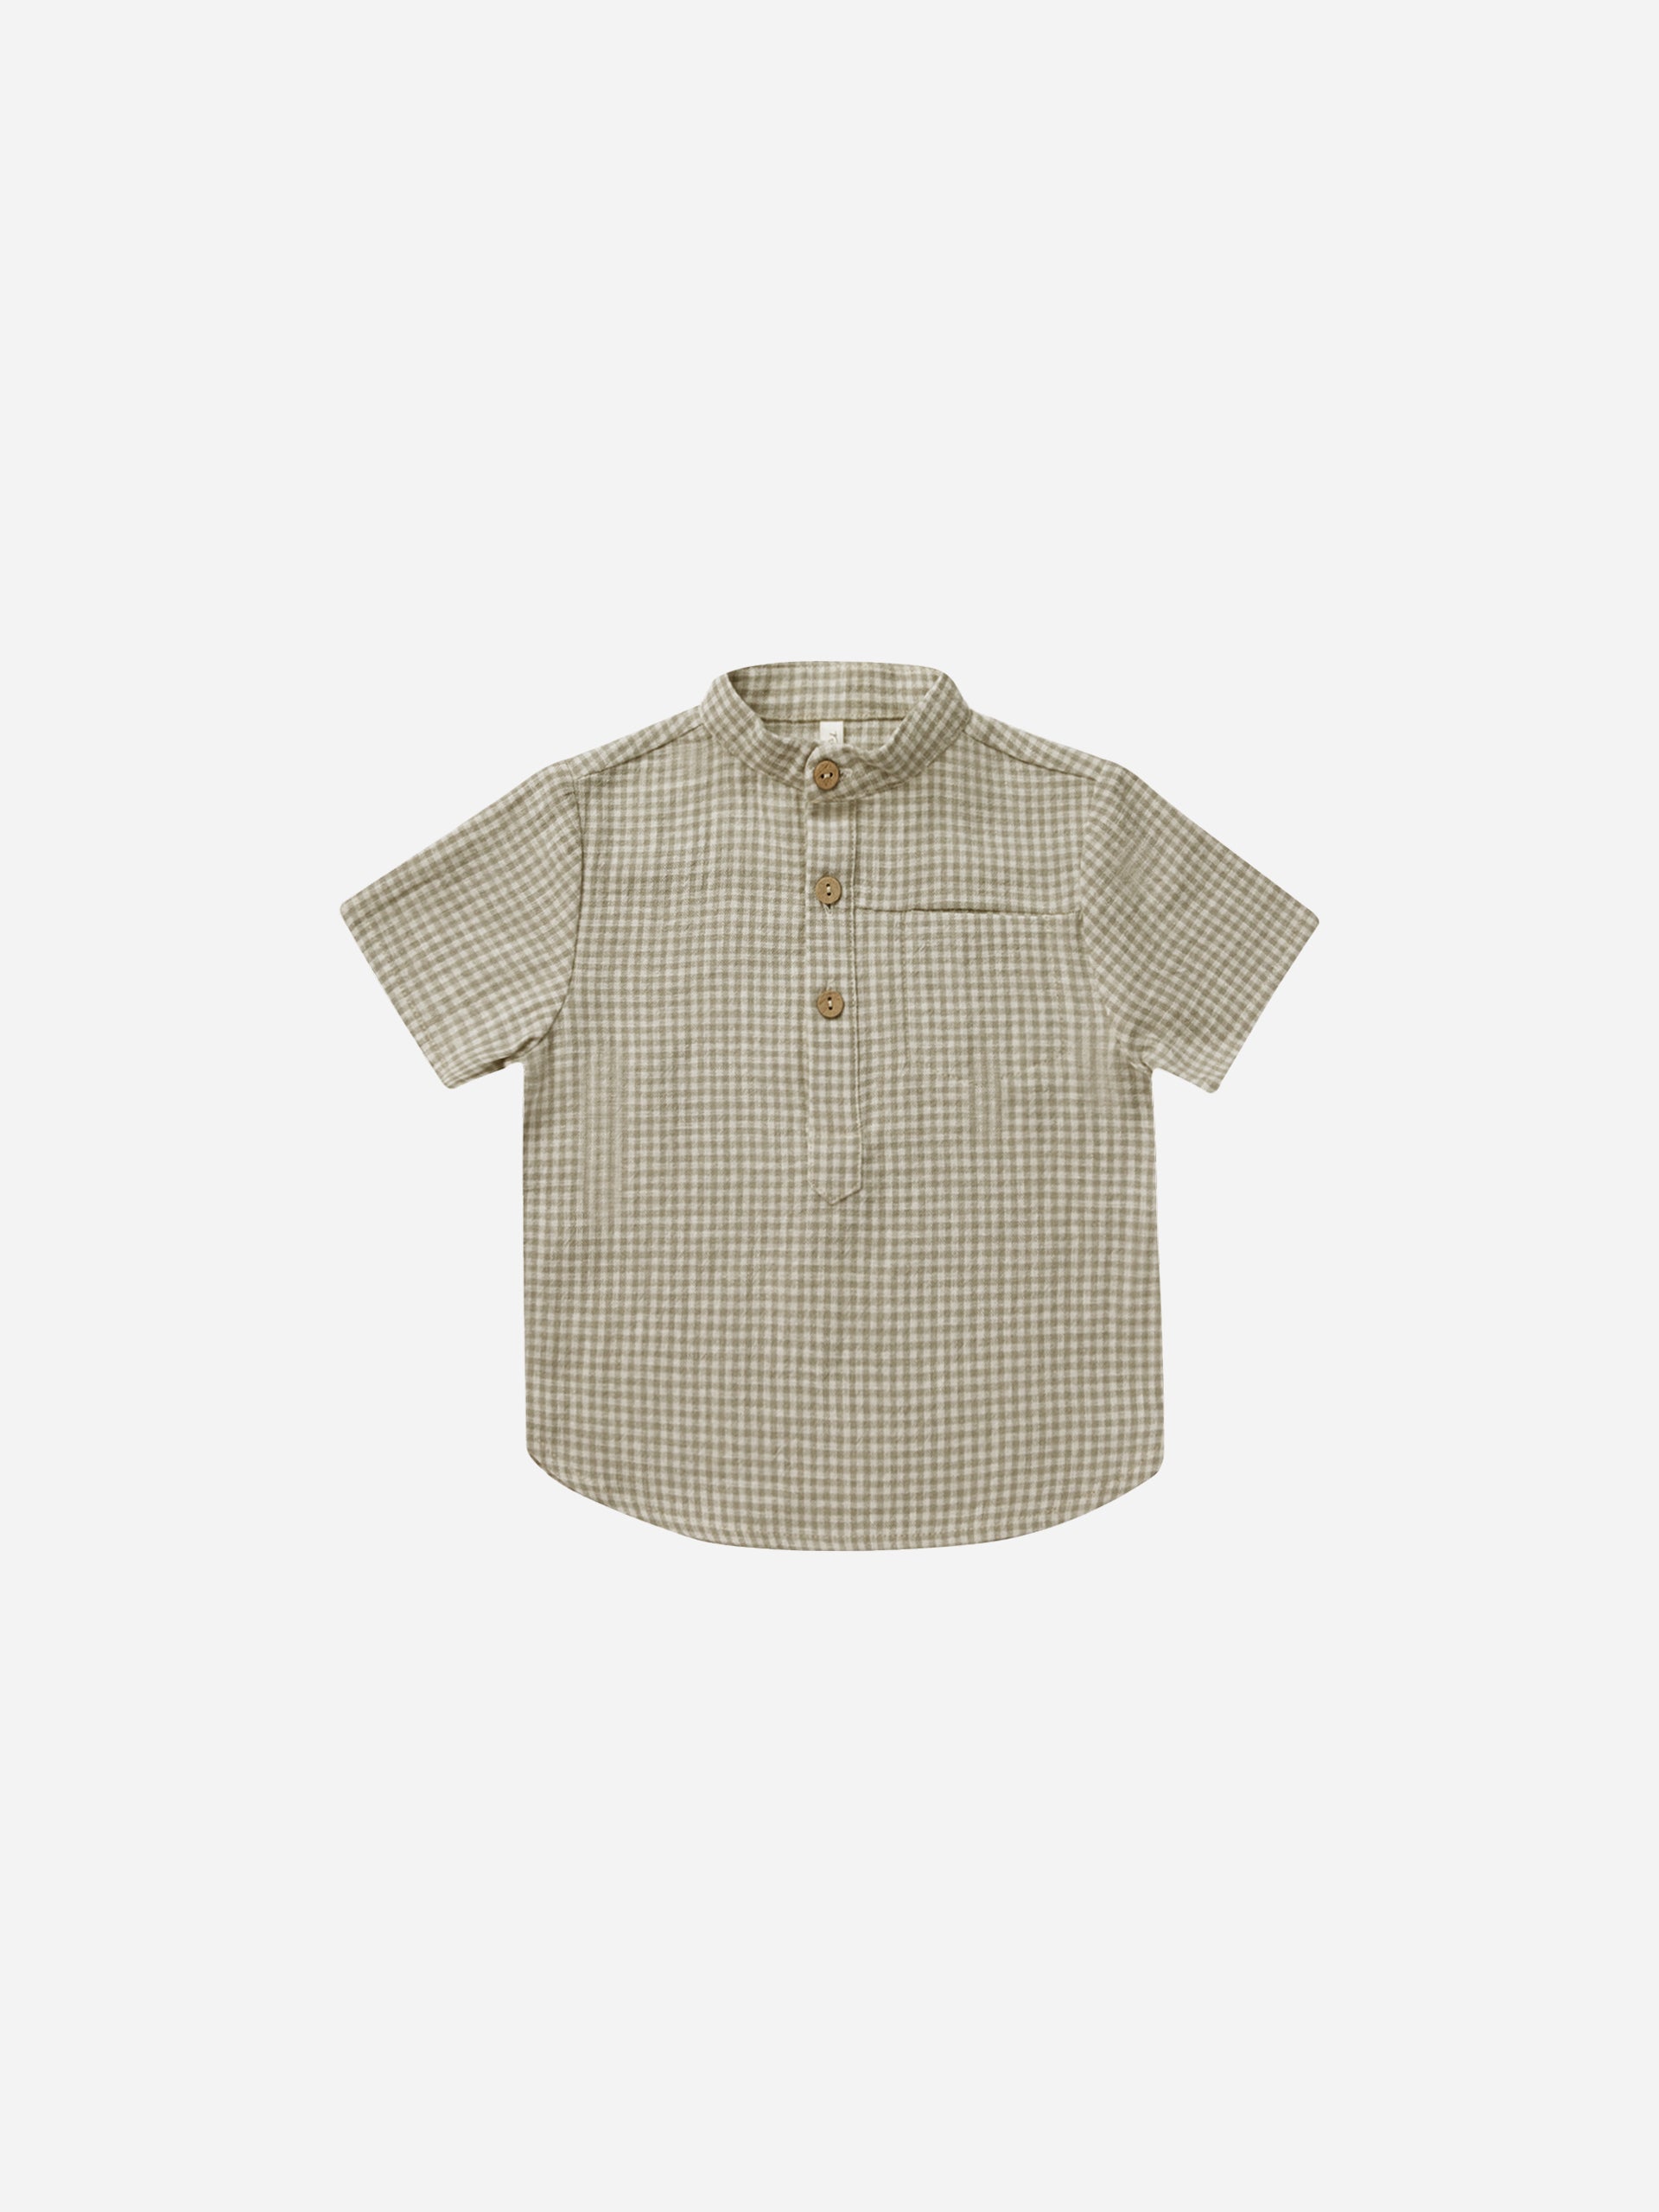 Mason Shirt || Sage Gingham - Rylee + Cru | Kids Clothes | Trendy Baby Clothes | Modern Infant Outfits |